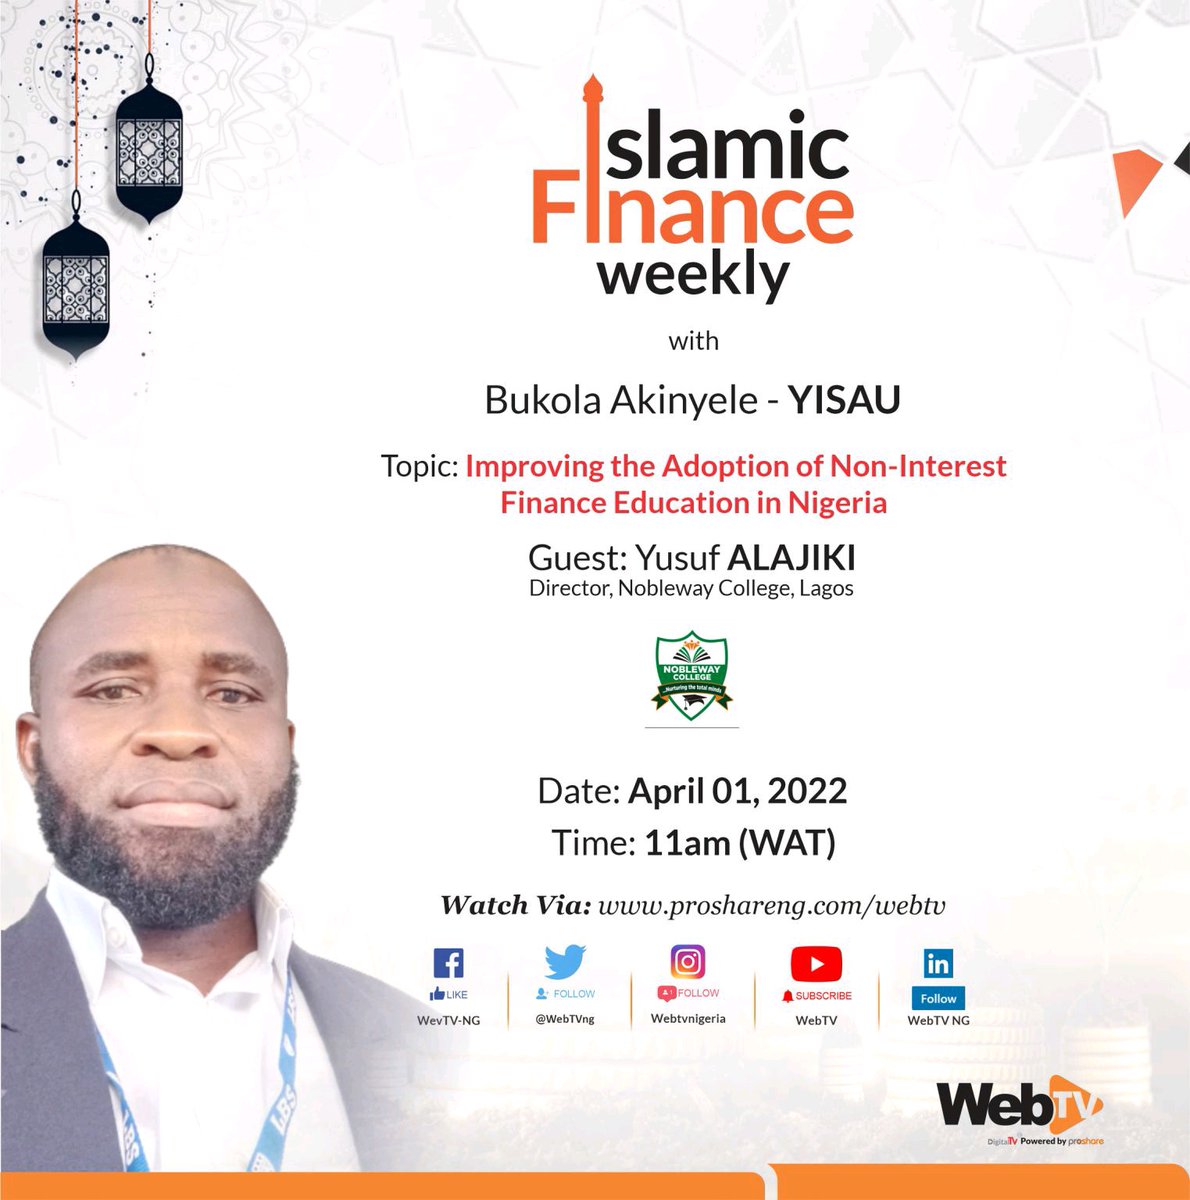 The growth of the Non-Interest Finance market in Nigeria relies heavily on achieving Islamic Finance education advancement across the country. 
How can we bridge the huge manpower deficit in the ethical finance market? 
Watch #Islamicfinanceweekly tomorrow at 11am